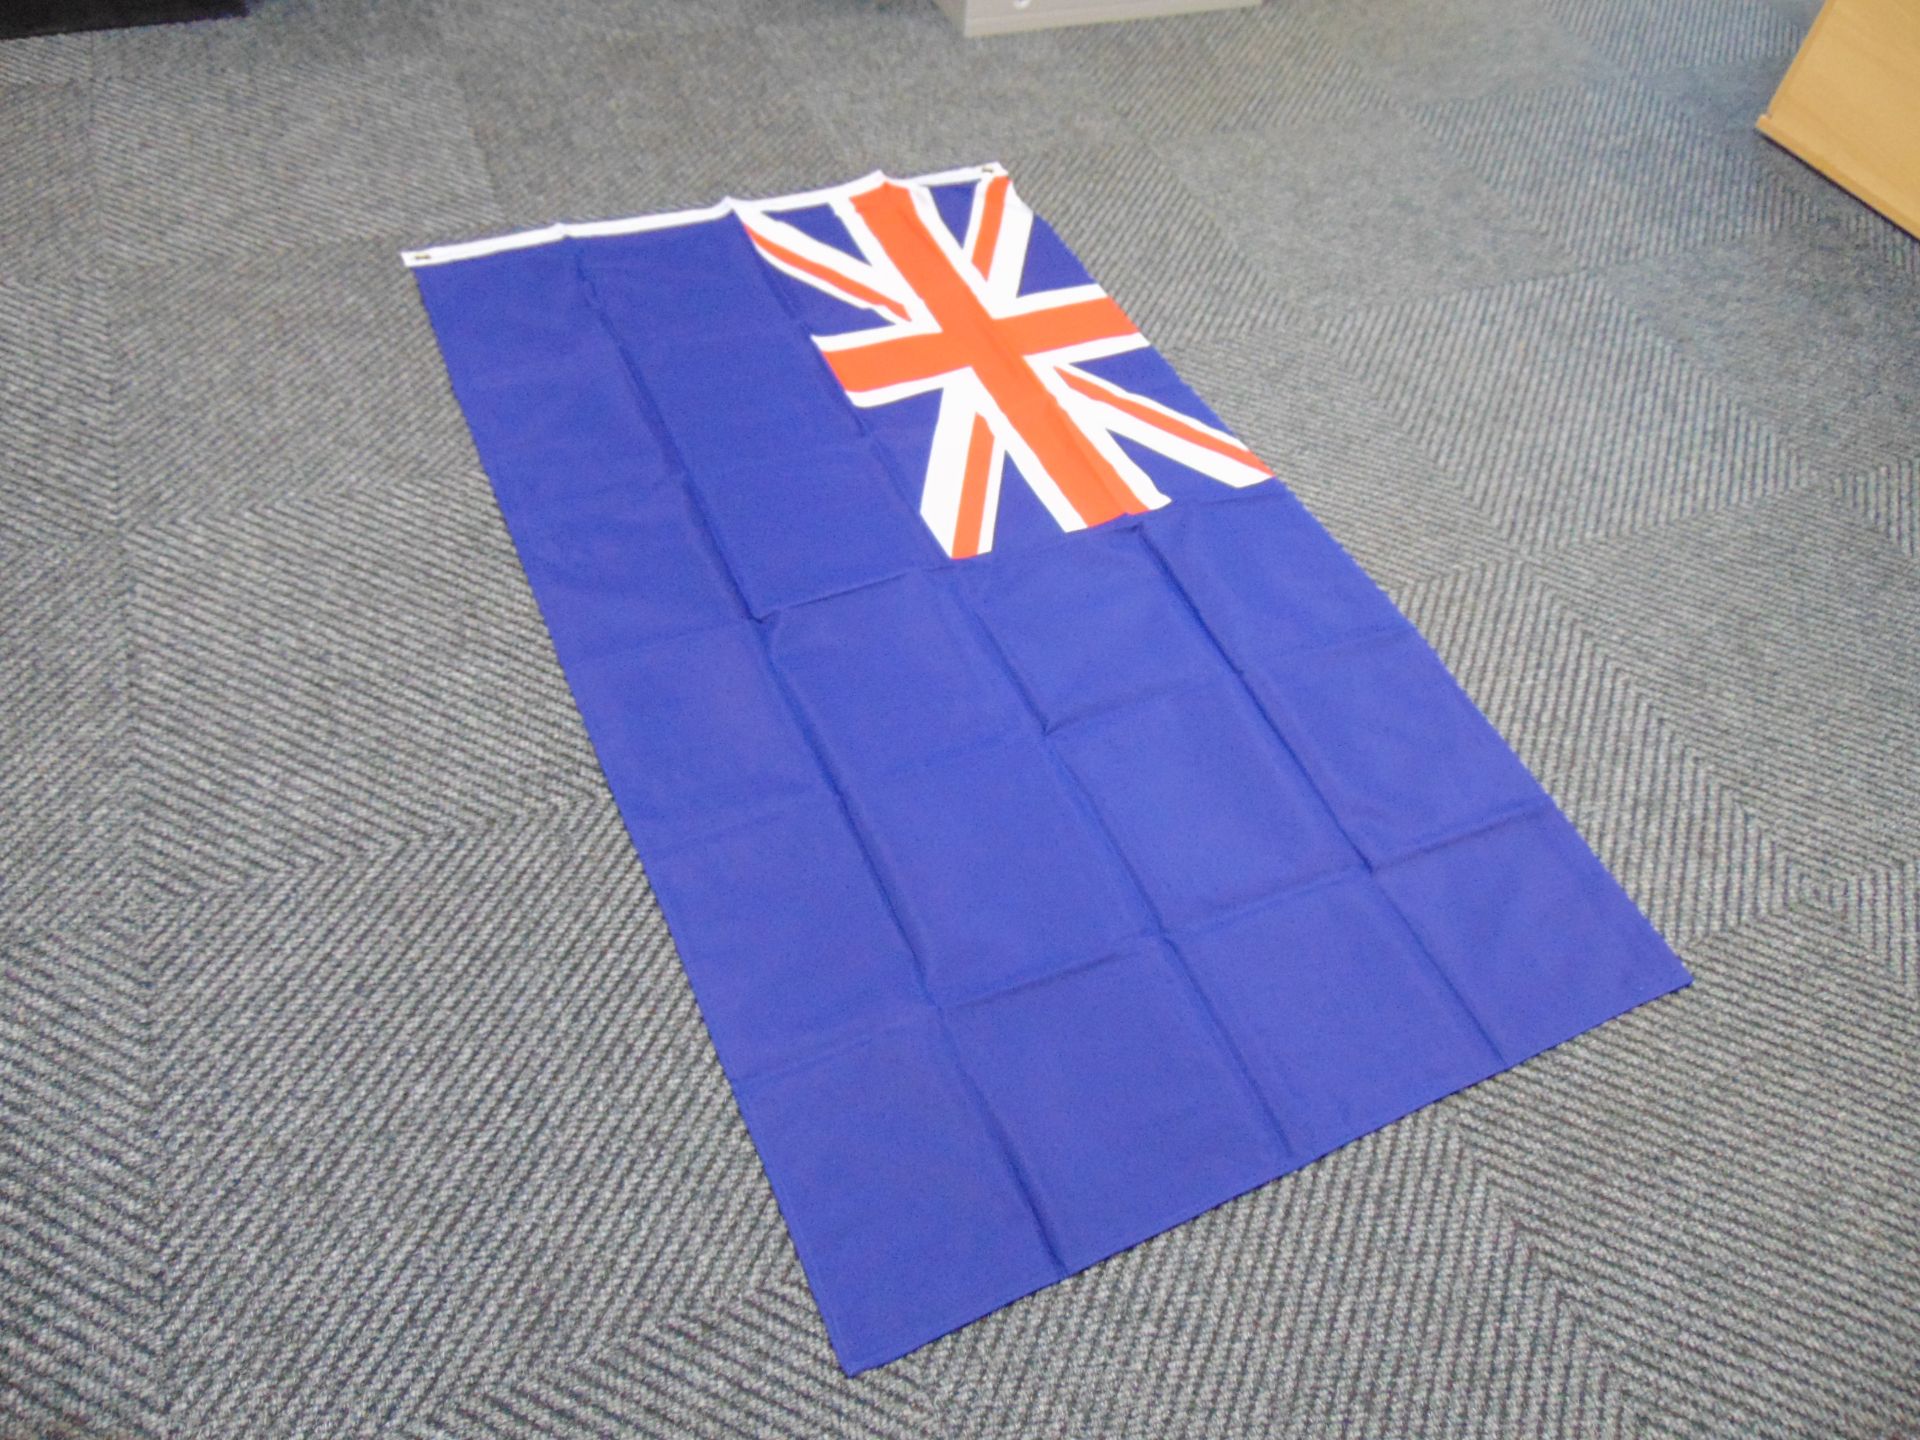 Blue Ensign Flag - 5ft x 3ft with Metal Eyelets. - Image 5 of 6